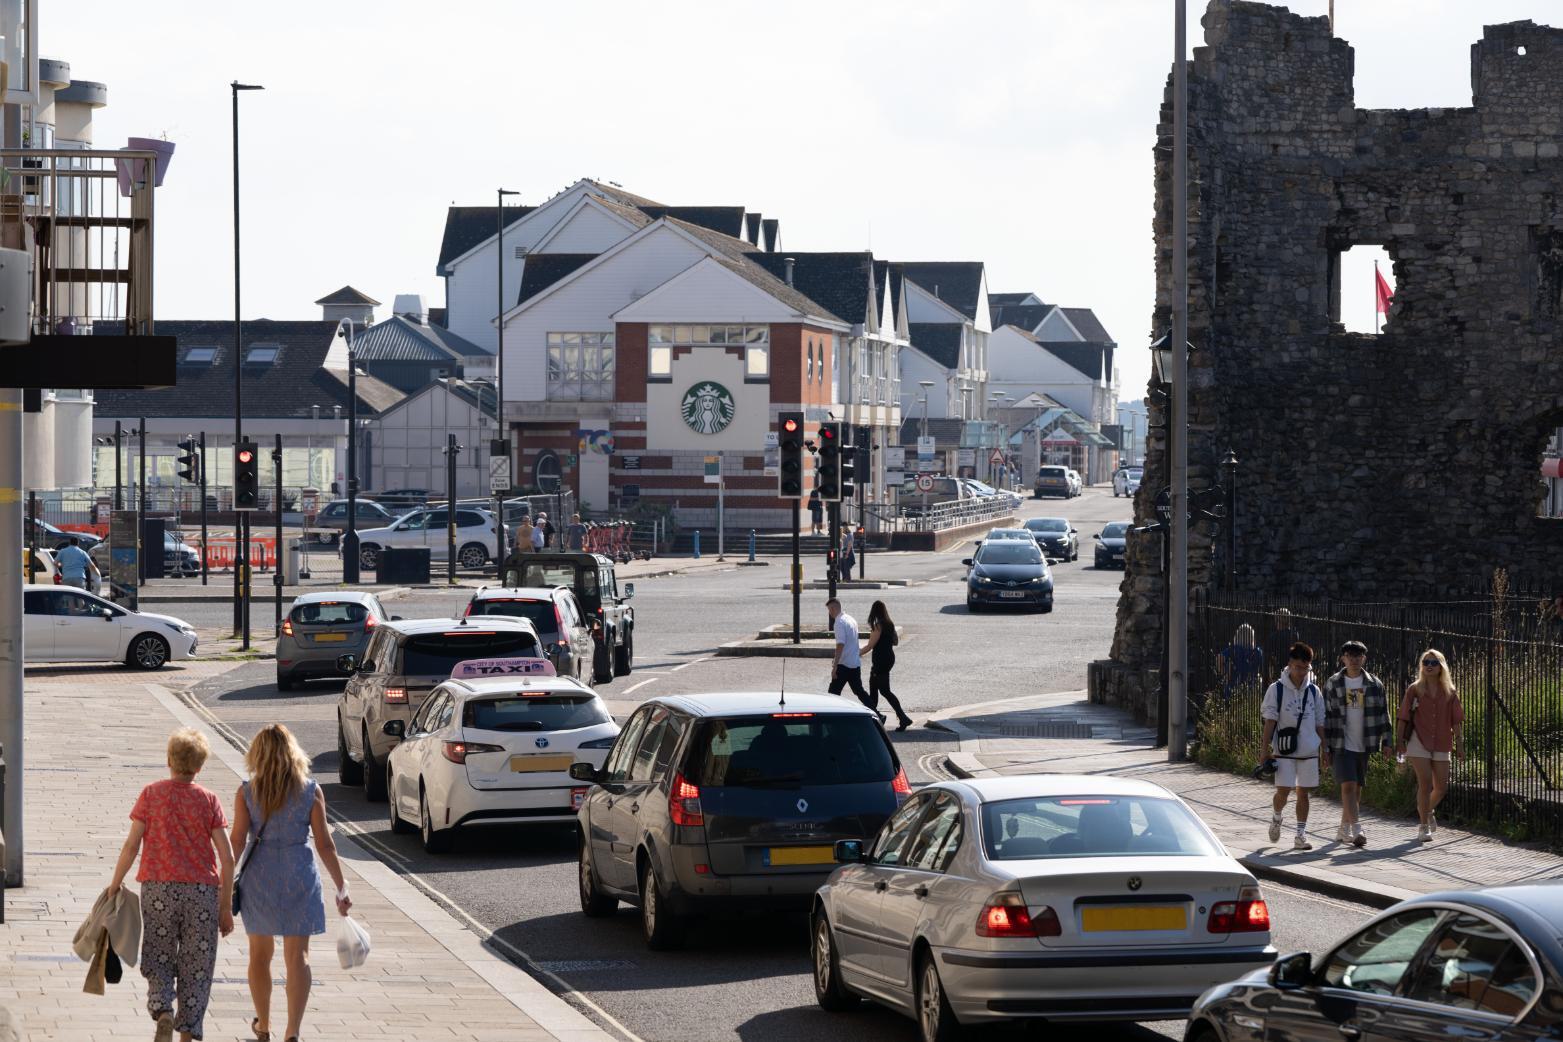 Cars stopped at red traffic light in Town Quay